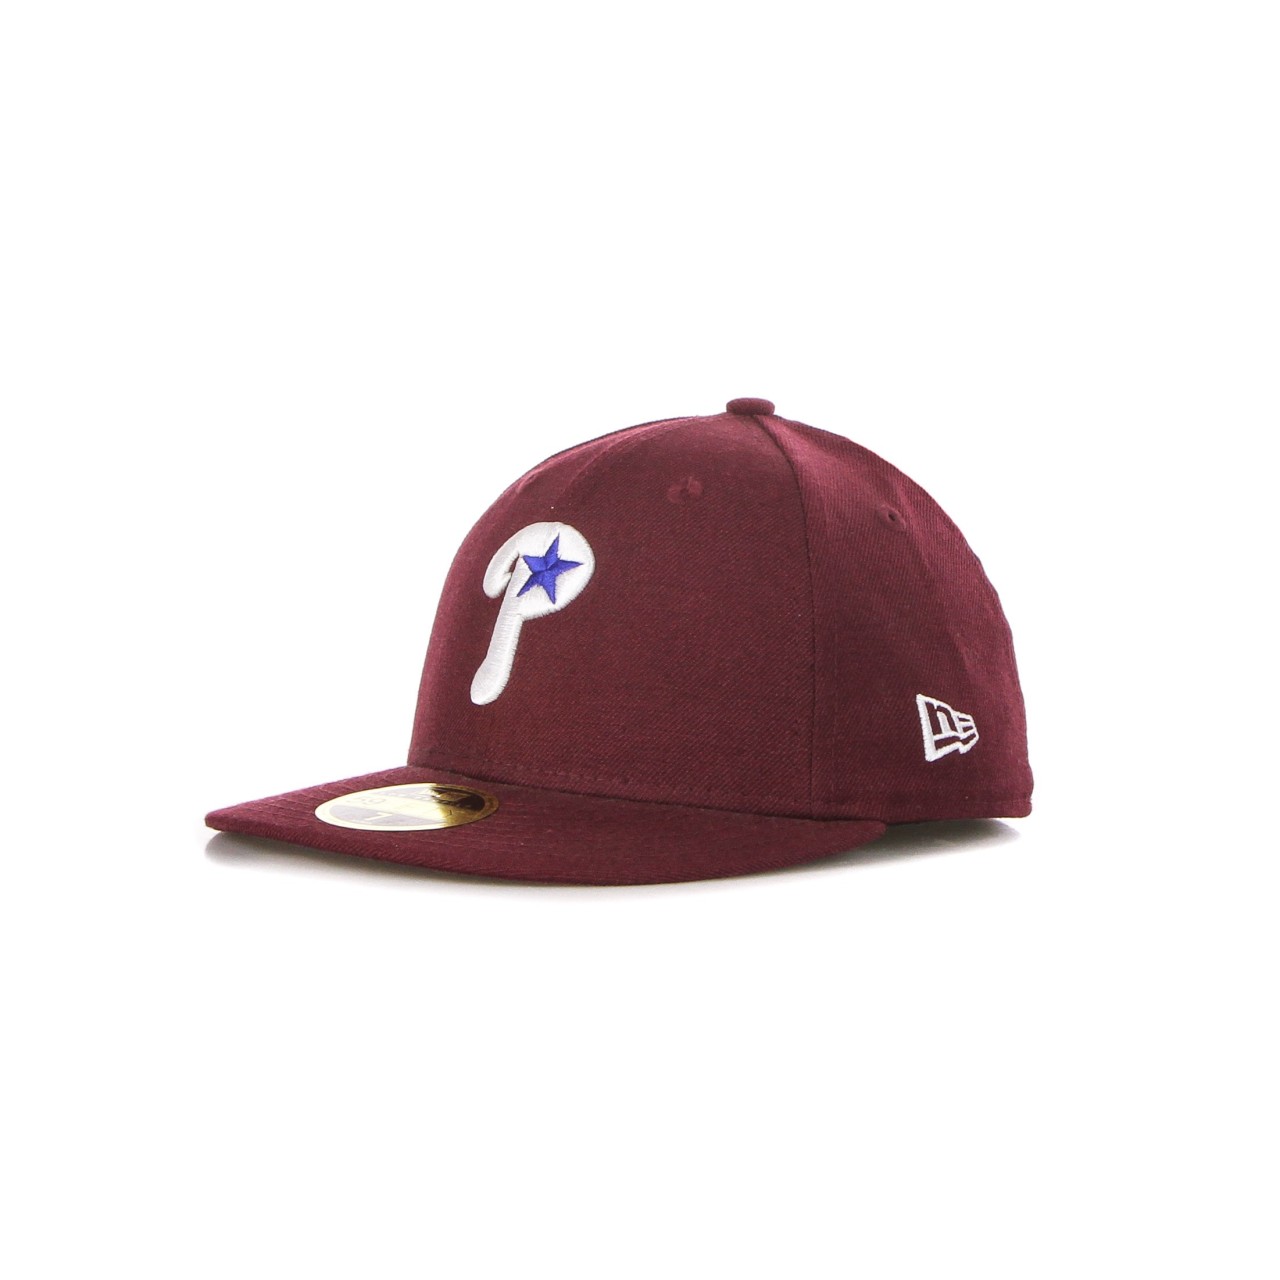 NEW ERA COOP WOOL FITTED PHIPHI COOPERSTOWN 80524851